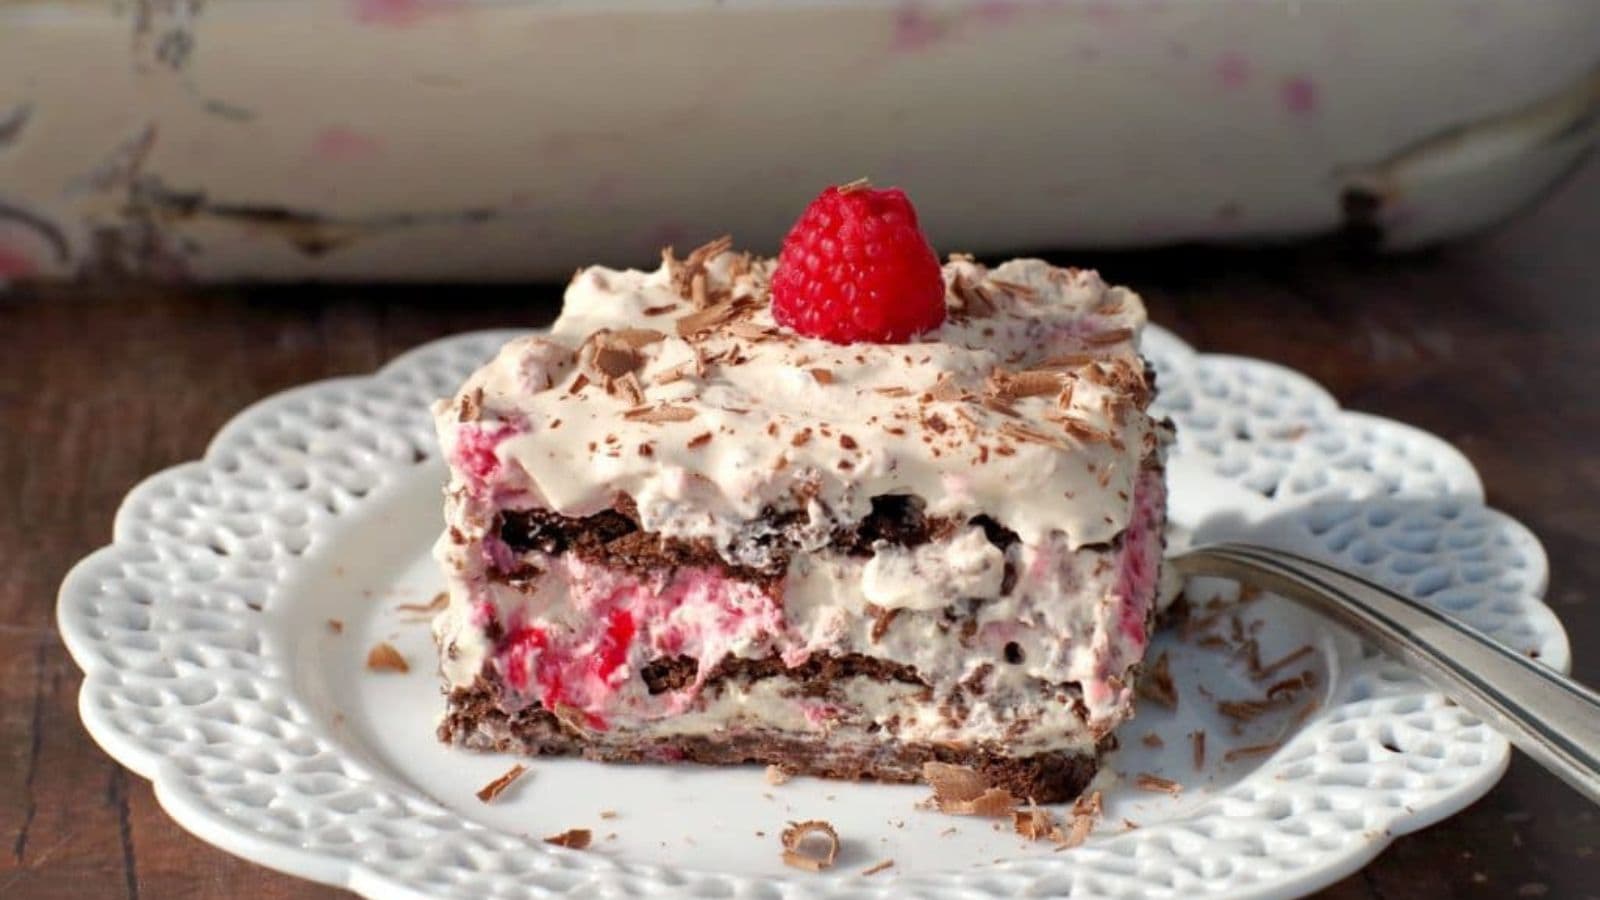 A dulce de leches cake with raspberry filling.